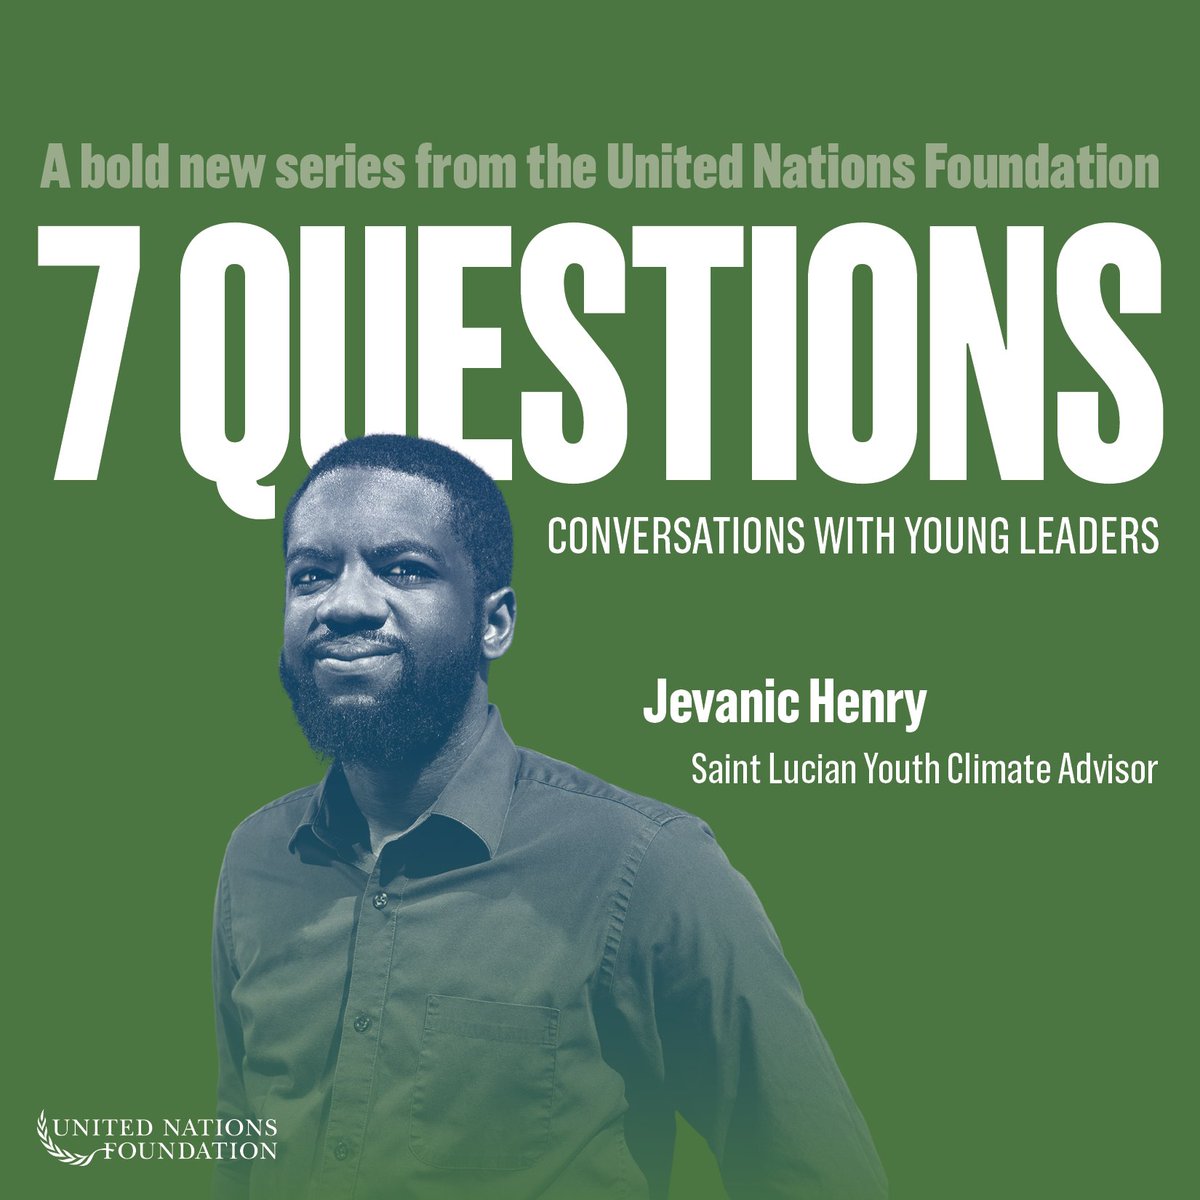 Jevanic Henry wants climate justice to be a priority, not an afterthought. Growing up in Saint Lucia, he's become an expert by experience. 🇱🇨 Stay tuned for our full 7 Questions conversation with one of the UN Secretary-General's youth climate advisors.